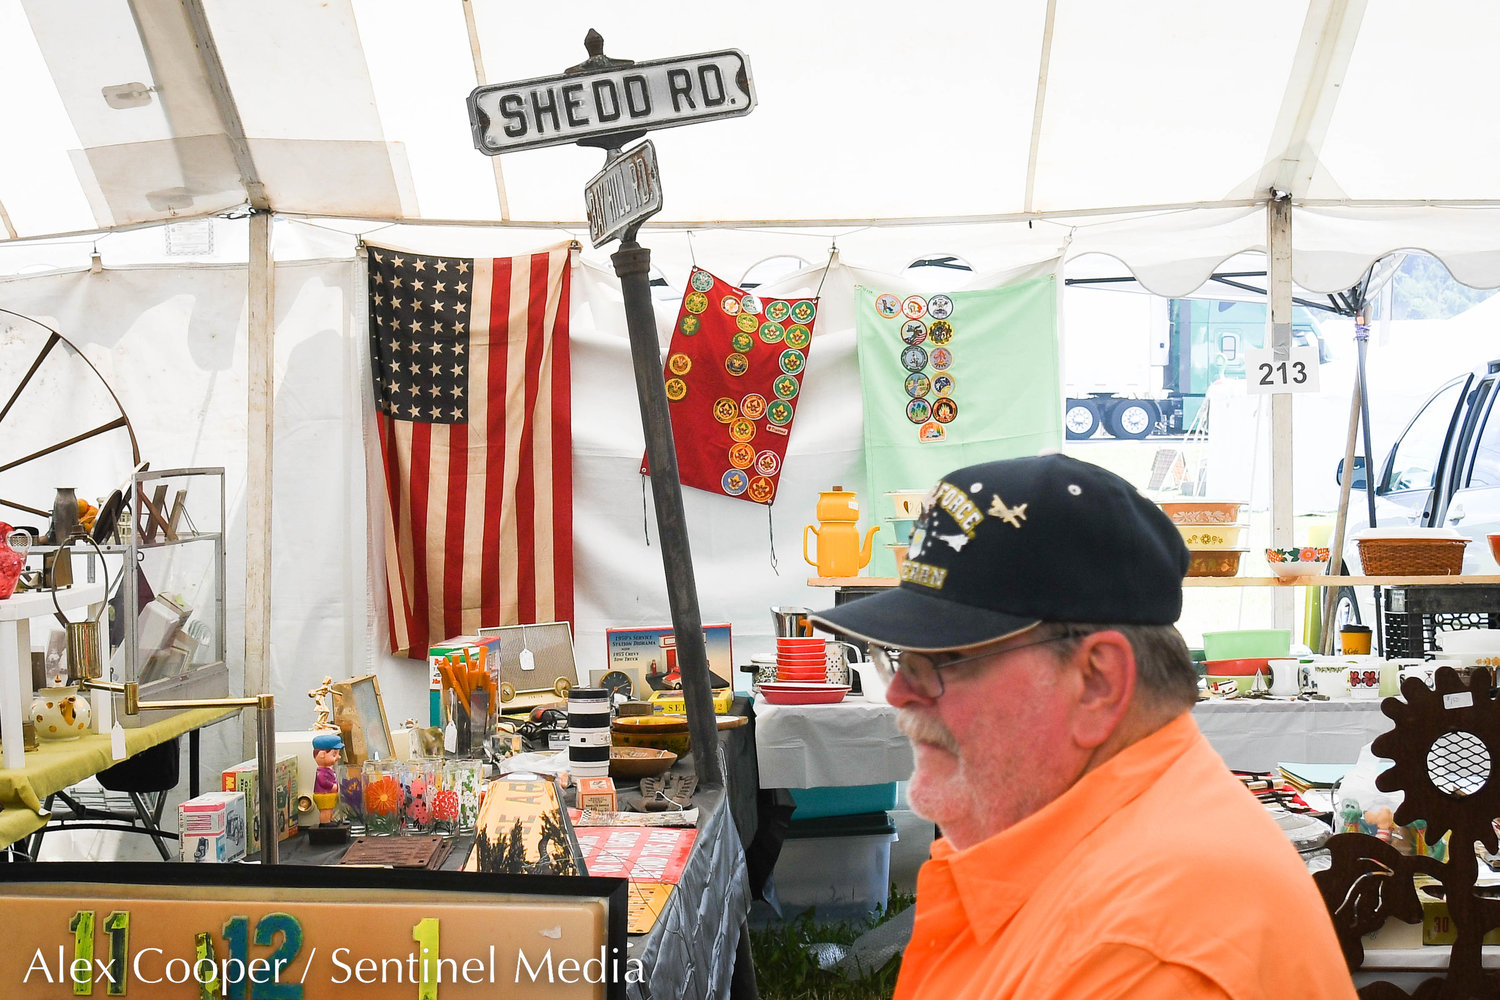 The famed Madison-Bouckville Antique Week returned on Monday, August 15. The event will continue until Monday August 21 with more than 2000 vendors on 13 show fields from Madison to Bouckville on Route 20.